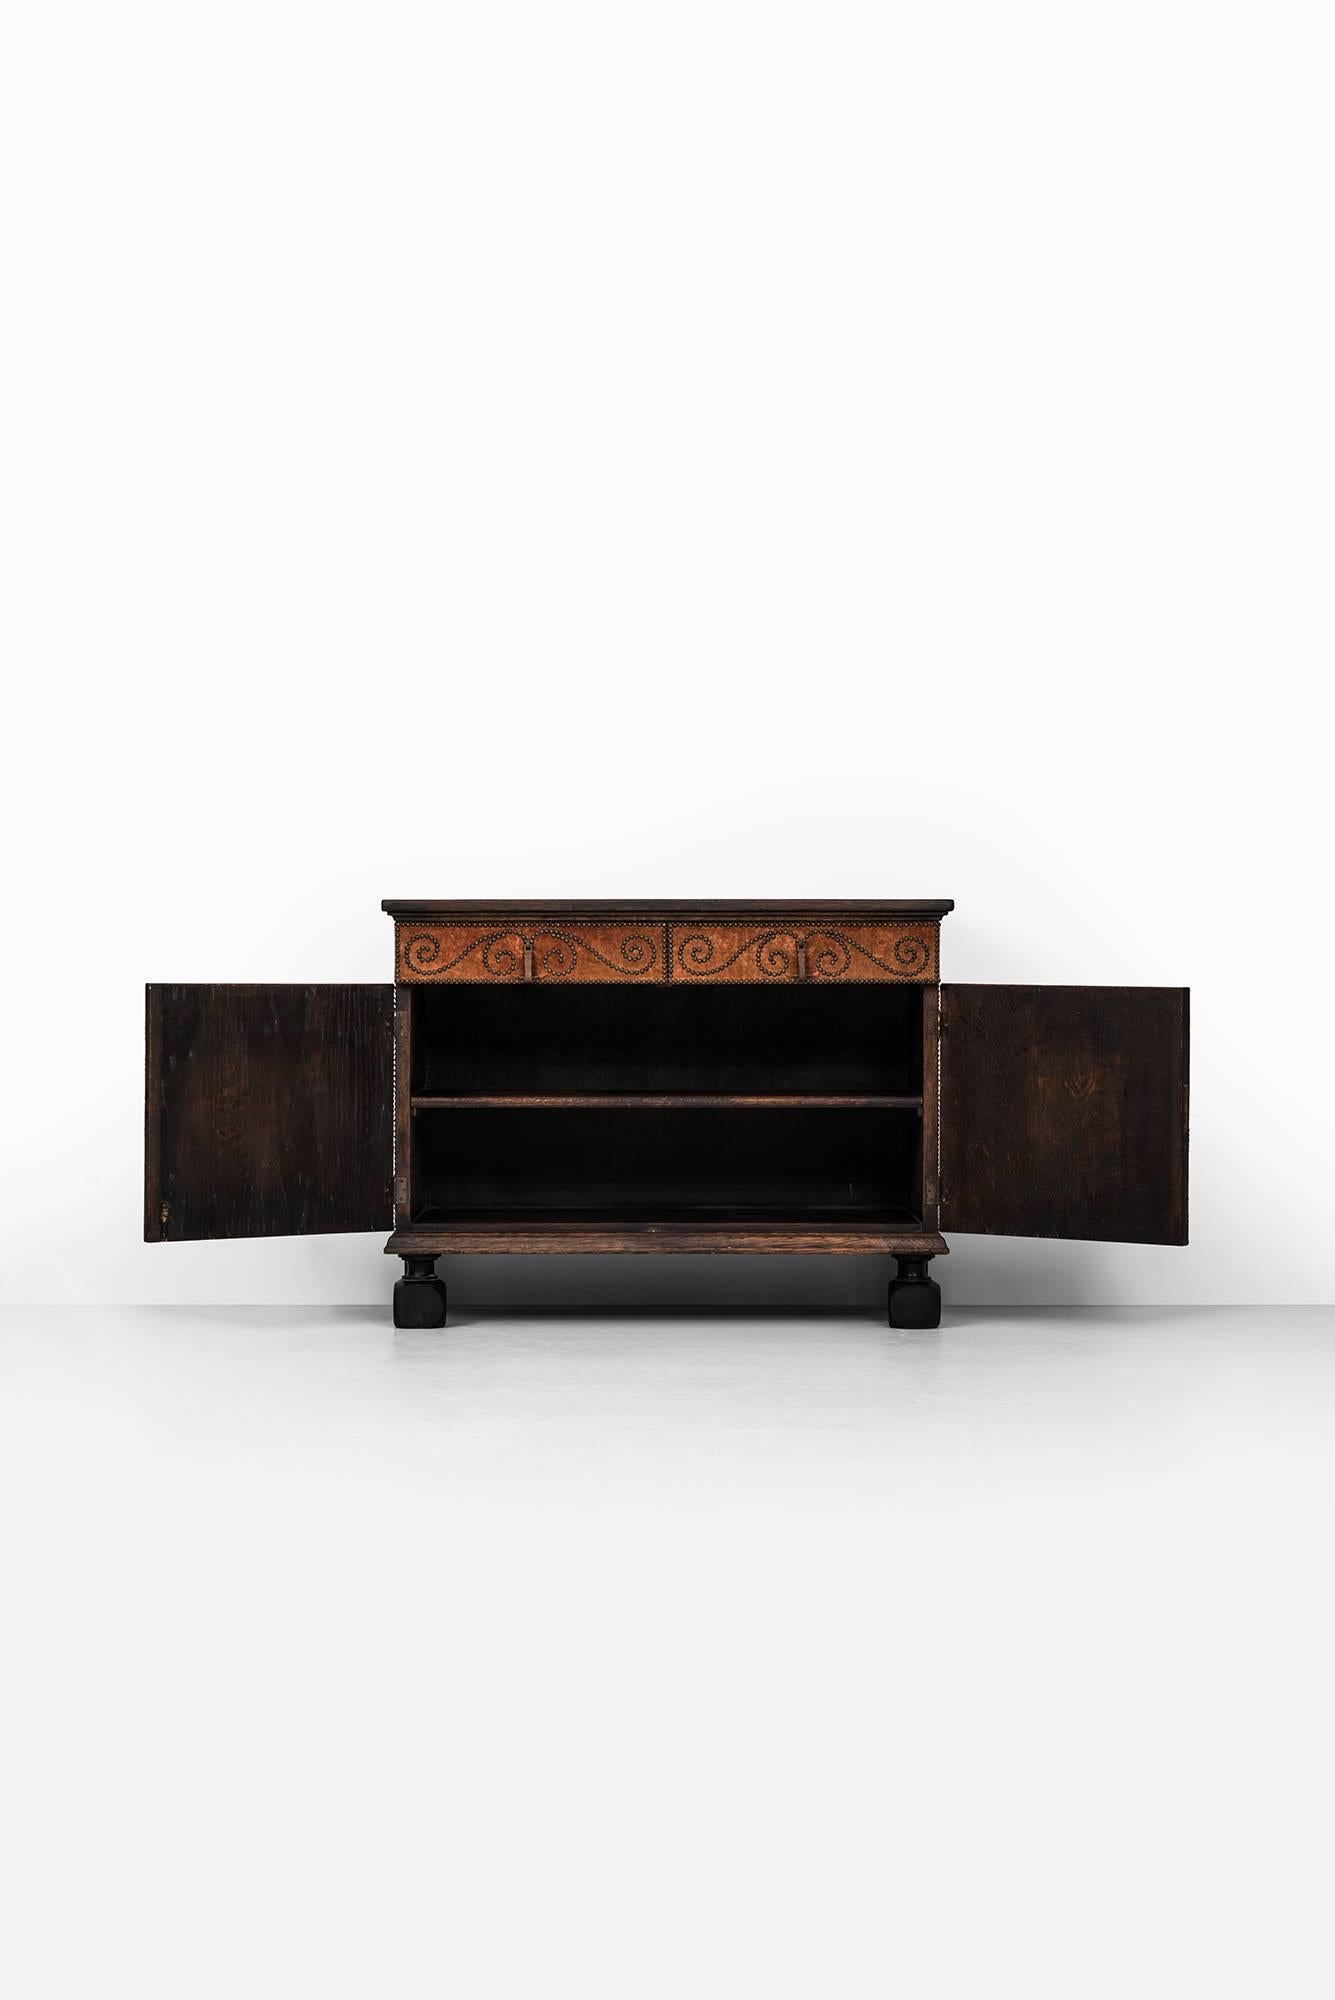 Scandinavian Modern Bopoint Cabinet Attributed to Otto Schulz and Probably Produced by Boet